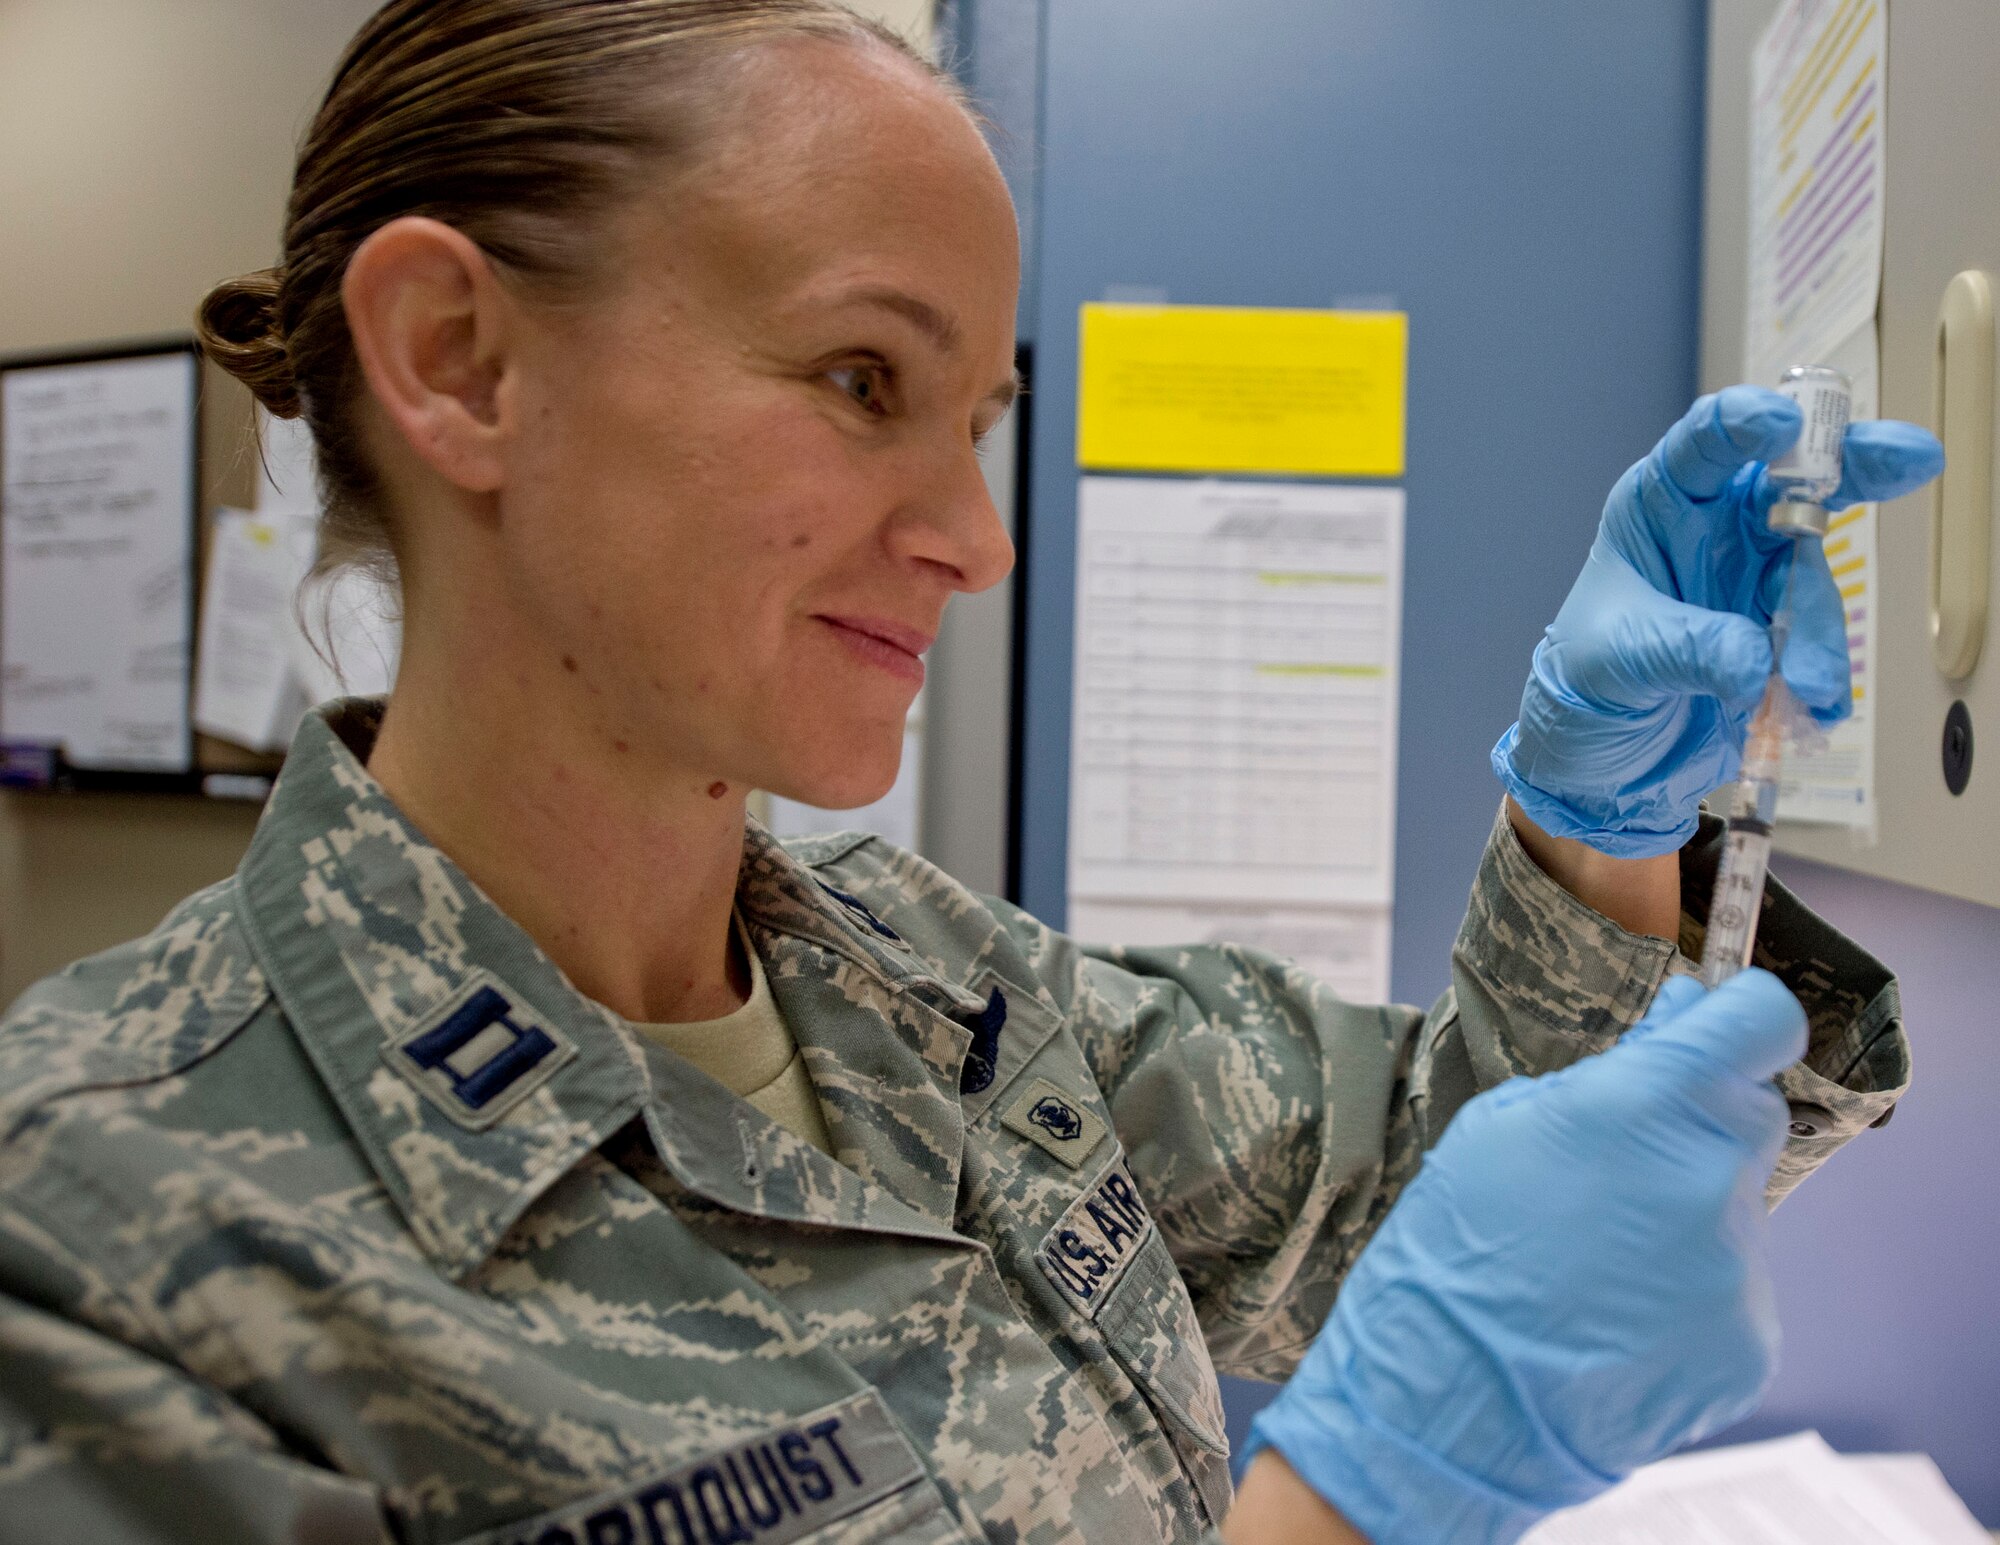 U.S. Air Force Capt. Amy Nordquist, 133rd Medical Group, fills a needle with a vaccine in St. Paul, Minn., Jan. 23, 2016. The vaccine is a mandatory requirement for the Airmen in order to stay healthy and prevent sickness. 
(U.S. Air National Guard photo by Tech. Sgt. Amy M. Lovgren/Released)